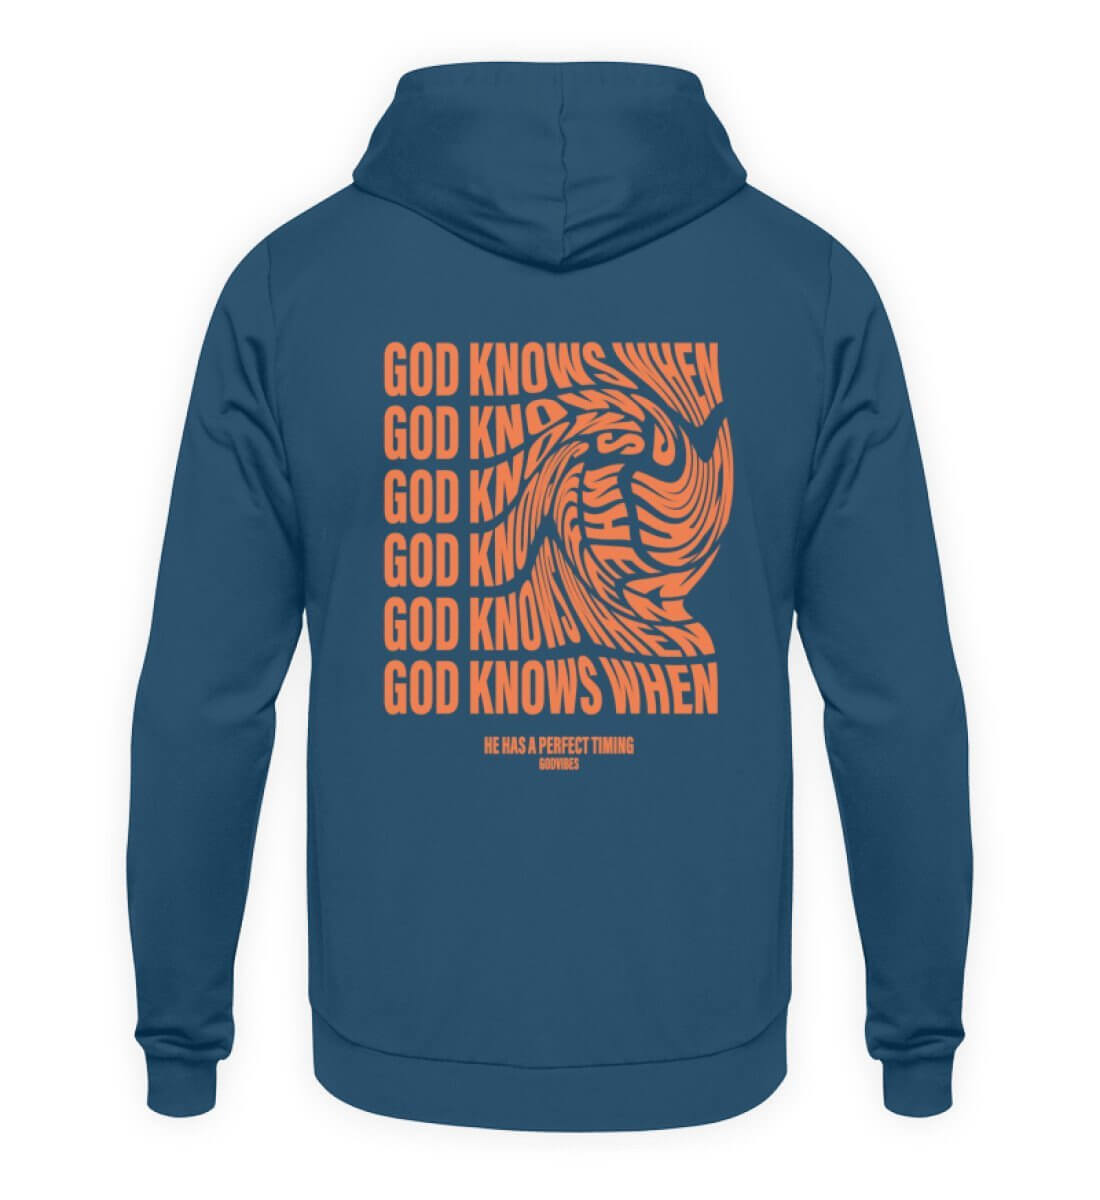 GOD KNOWS WHEN | Unisex Hoodie - GODVIBES